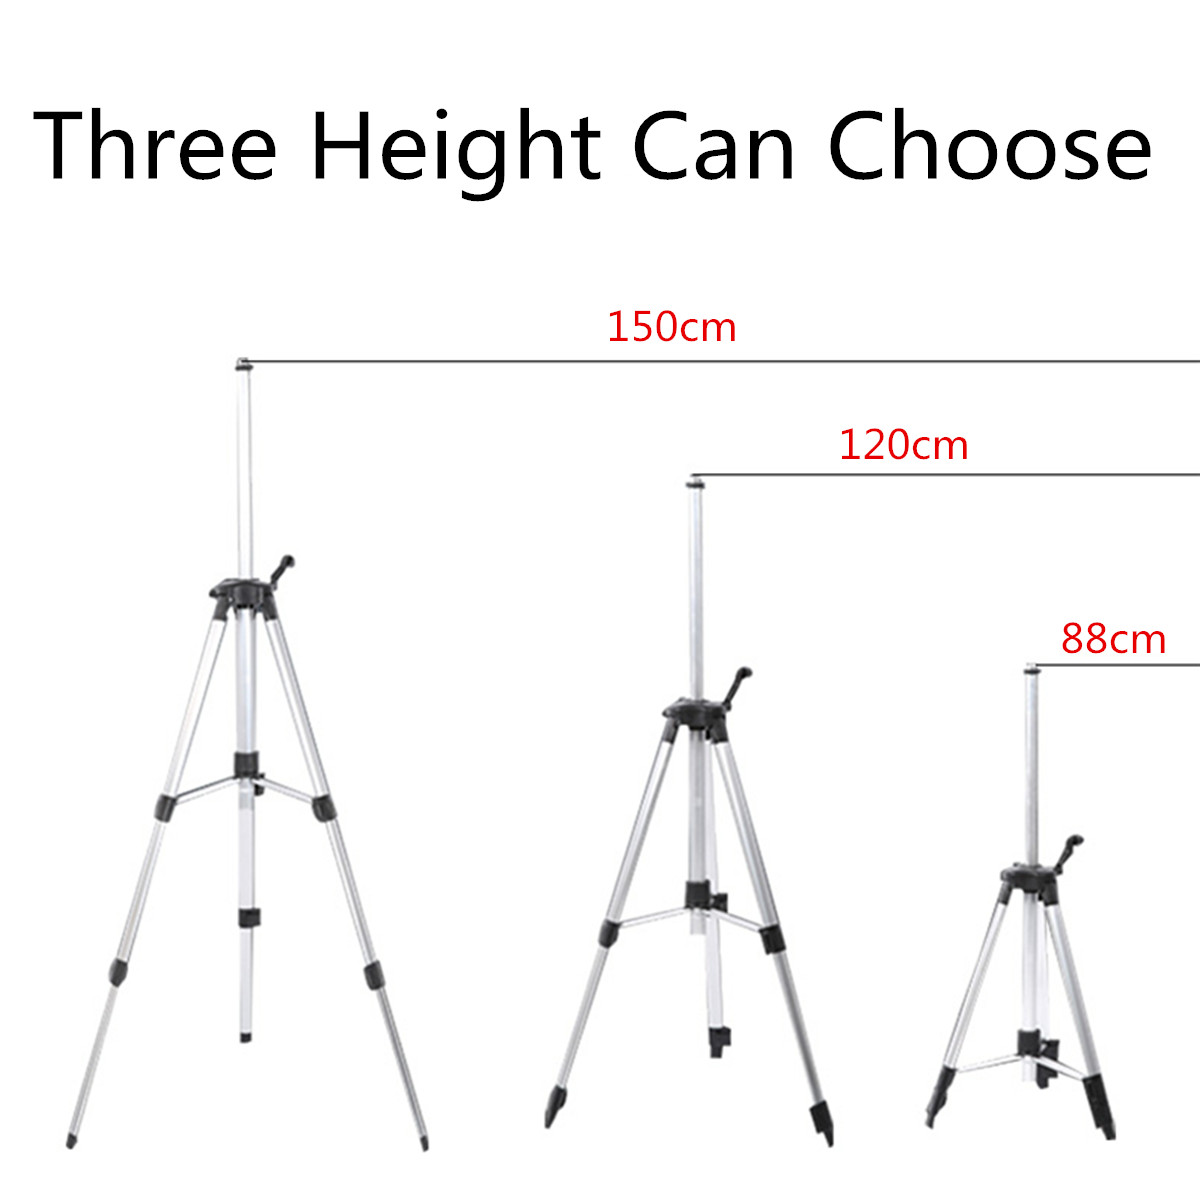 15M-Universal-Adjustable-Alloy-Tripod-Stand-Extension-For-Laser-Air-Level-with-Bag-1153680